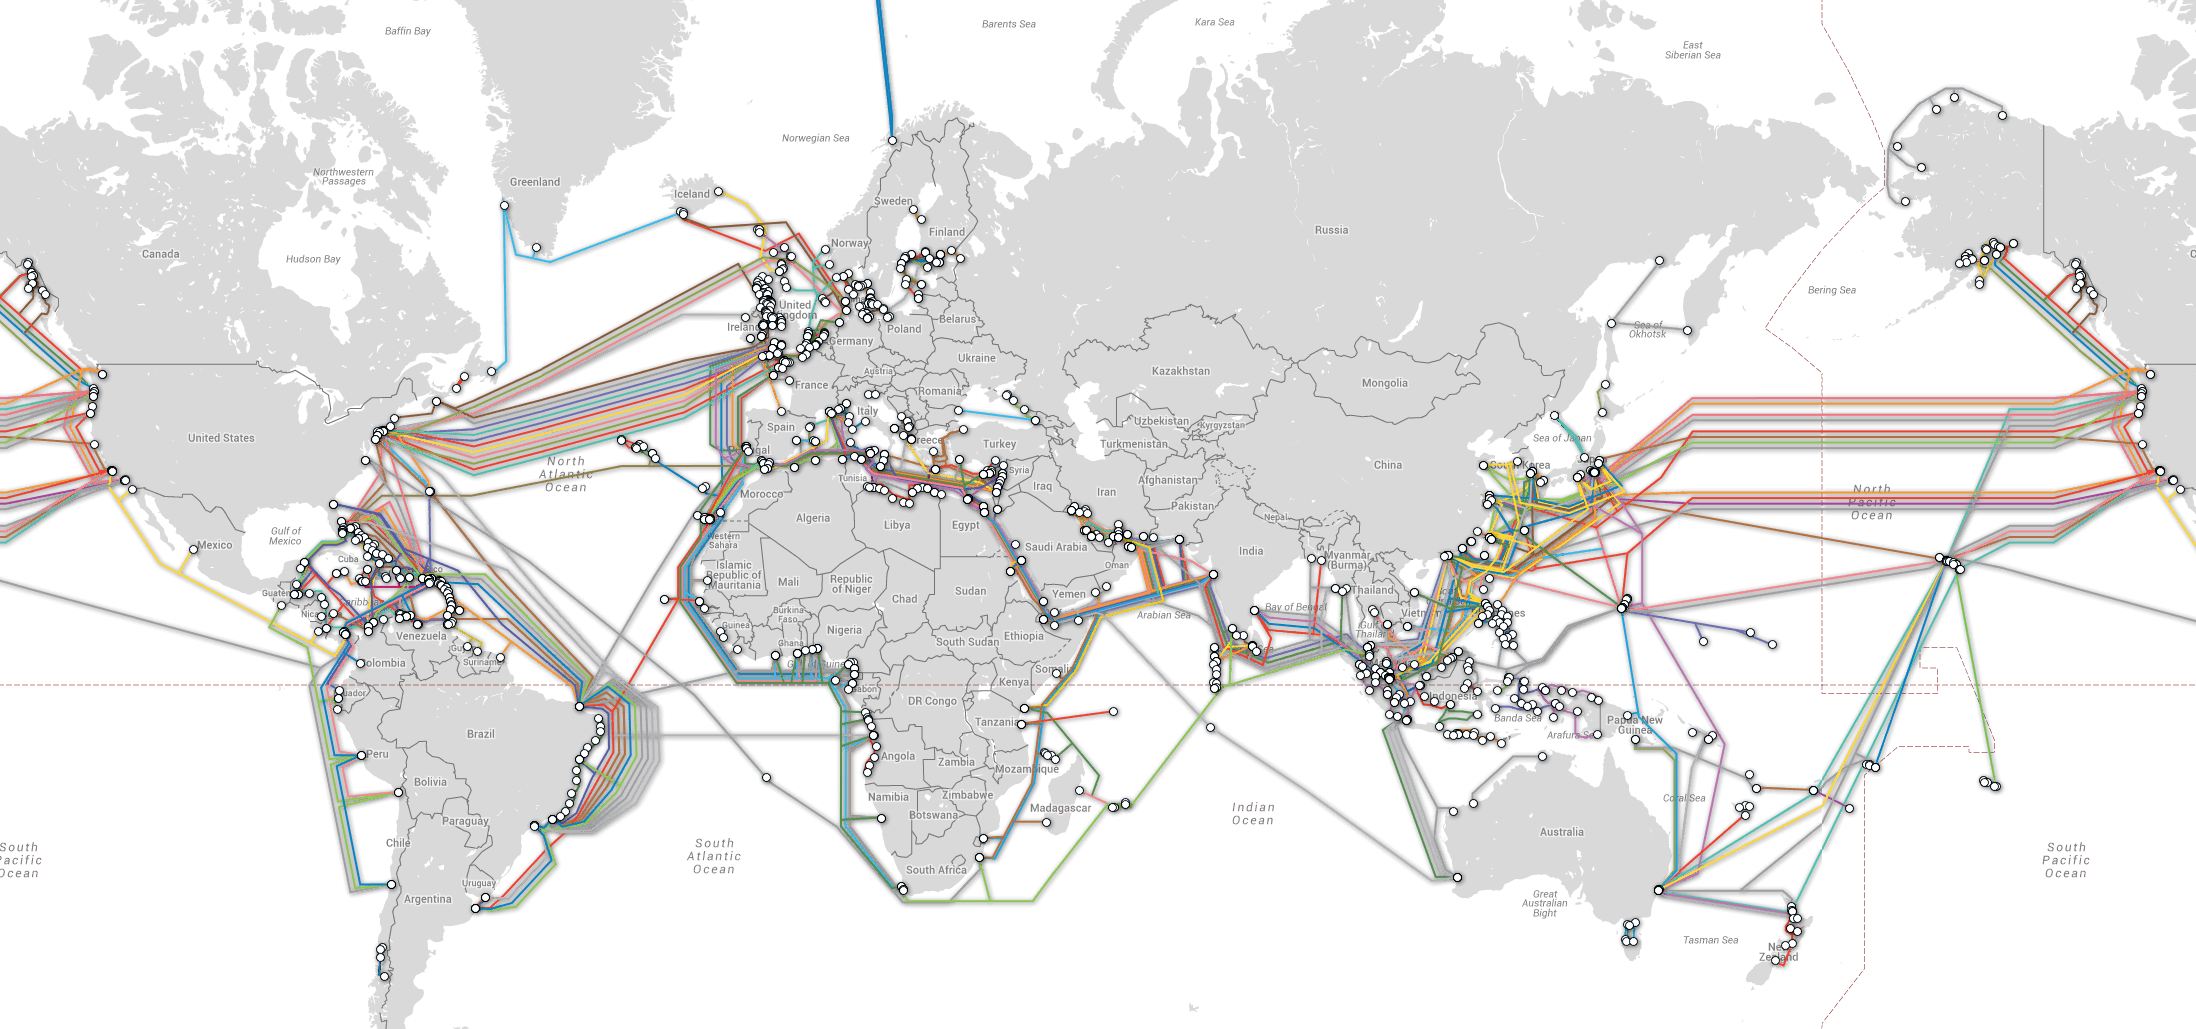 world-submarine-cable-map.png